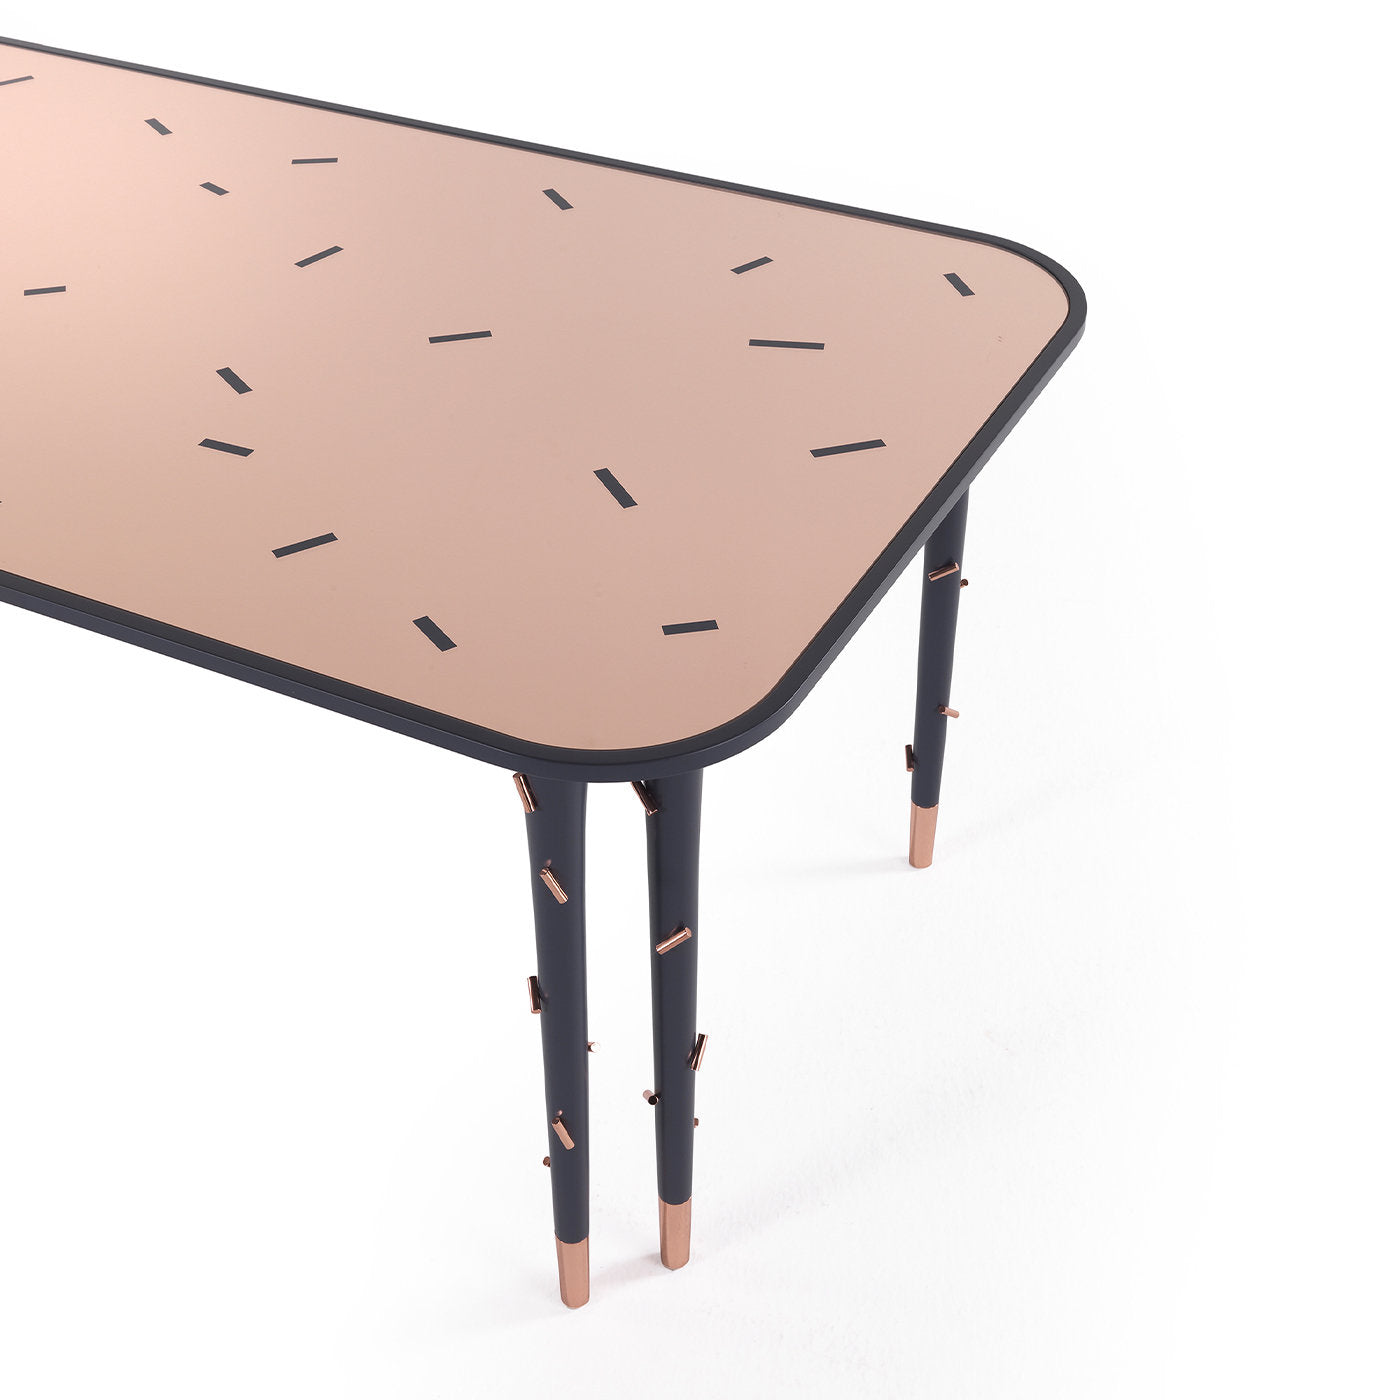 Mettic Dining Table by Matteo Cibic - Alternative view 3